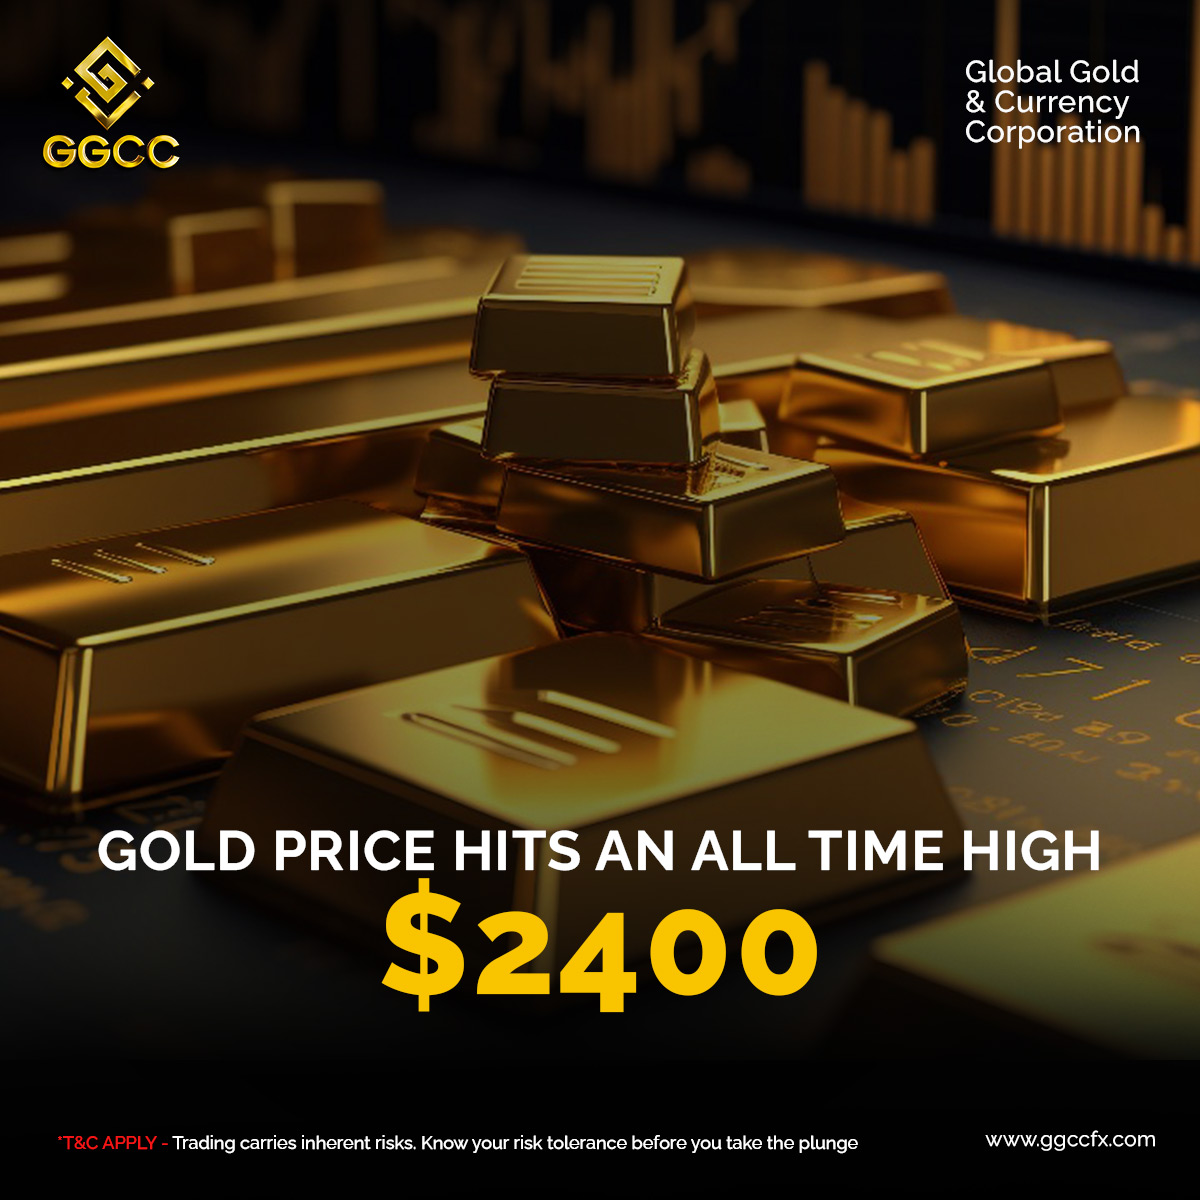 🌟 Breaking News 🌟 The gold market soars to unprecedented heights as the price hits an all-time high of $2400! I
#GoldPrice #AllTimeHigh #2400USD #GoldMarket   #GoldTrading #GoldPrices2024 #GoldenOpportunity #GGCCFX #TradeGold #GoldMarketUpdate #InvestingInGold 

3 / 4